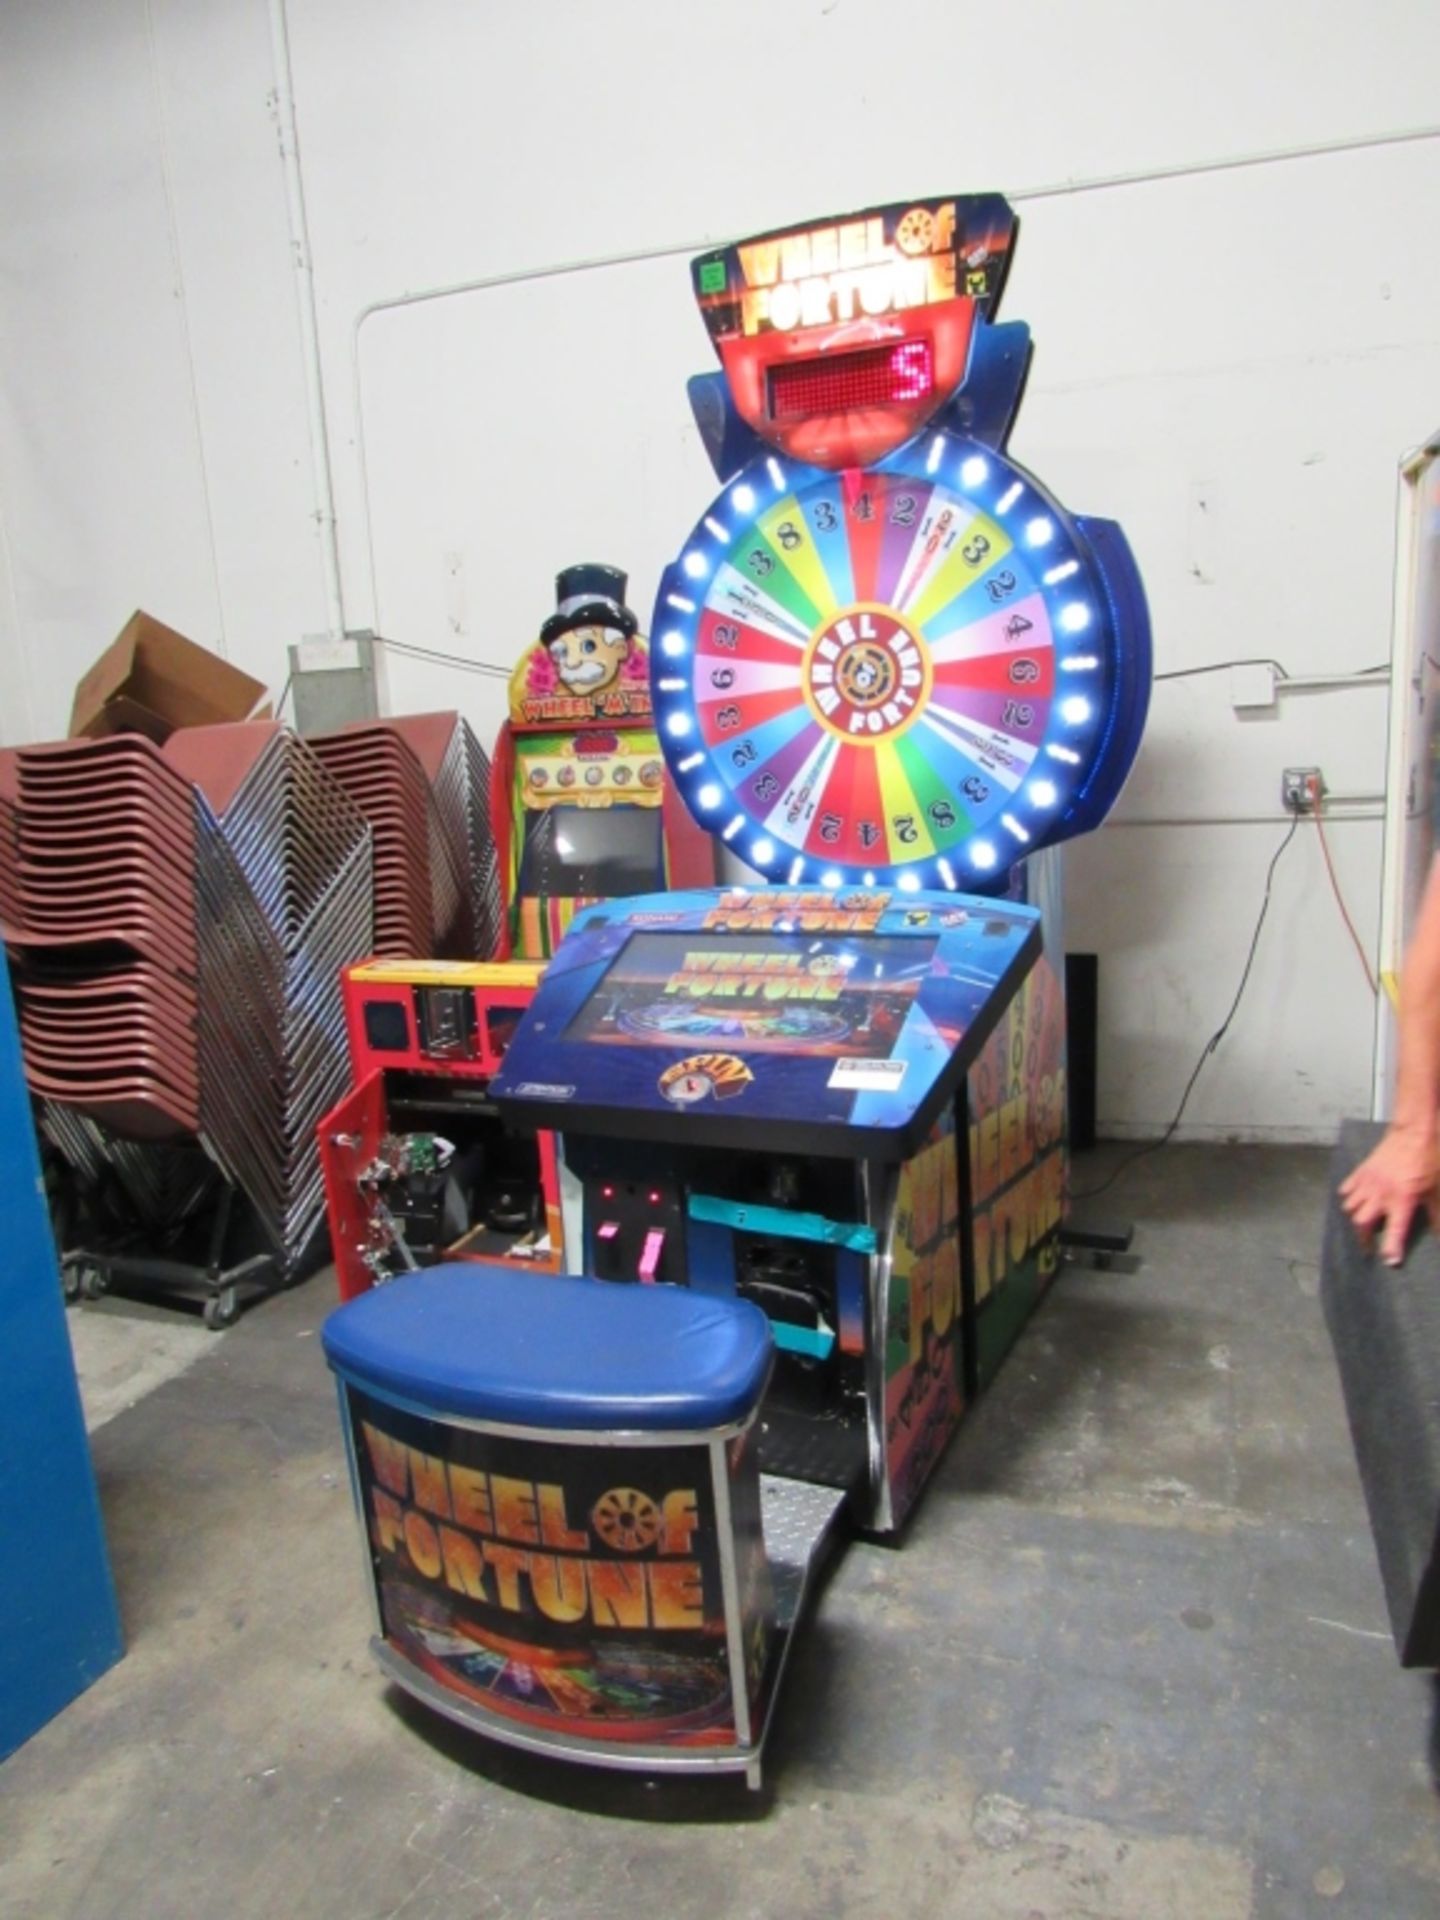 WHEEL OF FORTUNE DELUXE RAW THRILLS ARCADE GAME